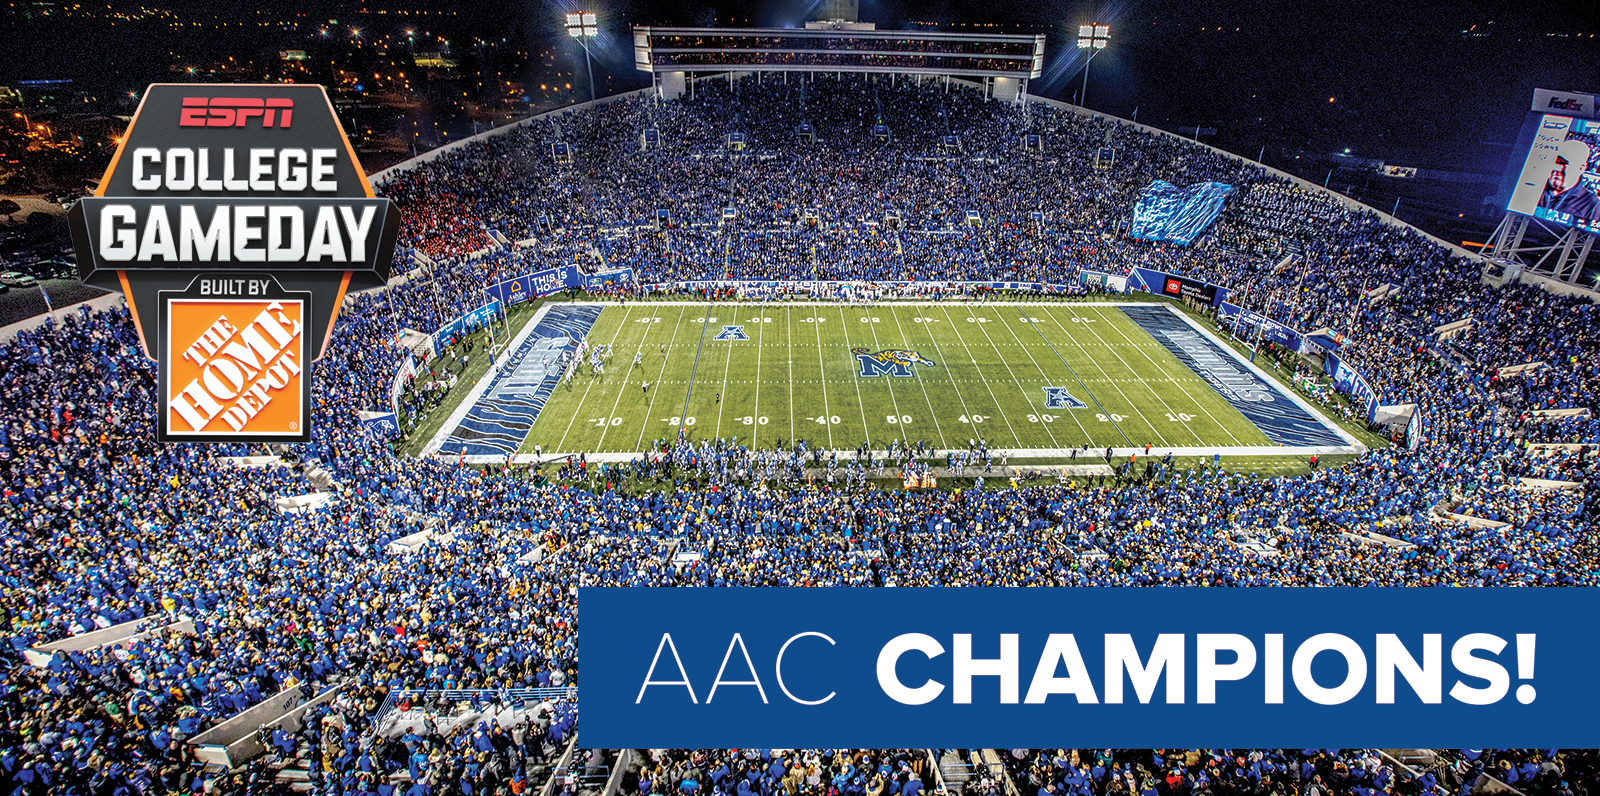 AAC Champions | ESPN College GameDay | (photo of Liberty Bowl Stadium at GameDay)